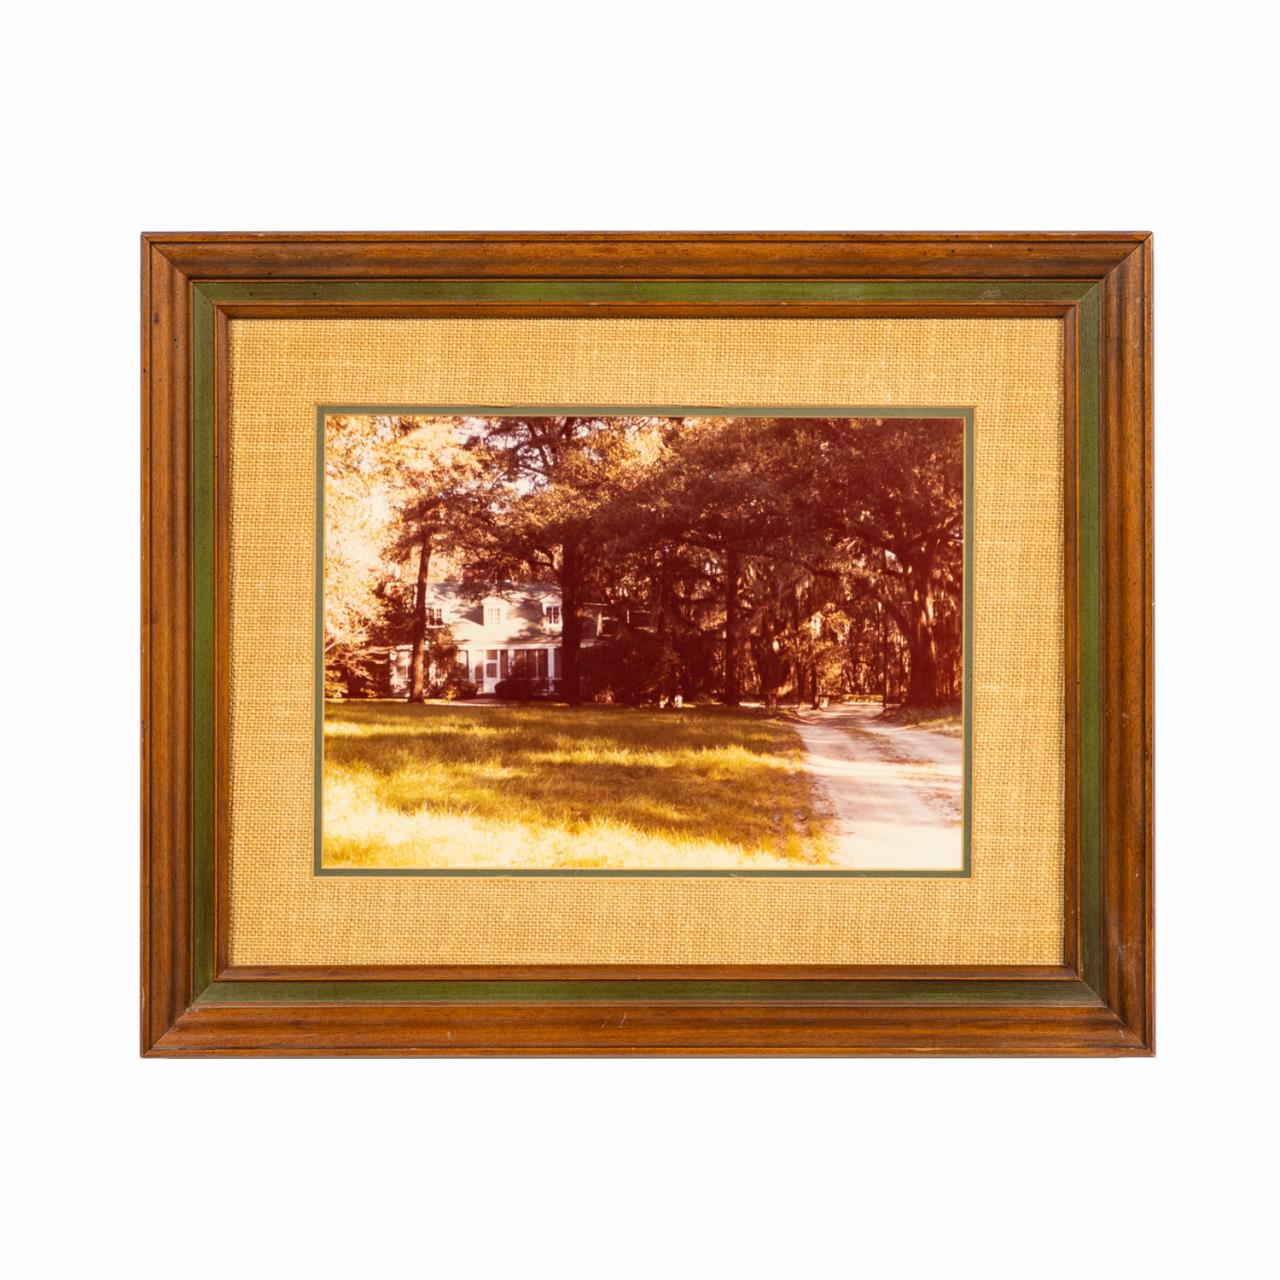 FRAMED COLOR PHOTO OF ICHAUWAY 359c5f